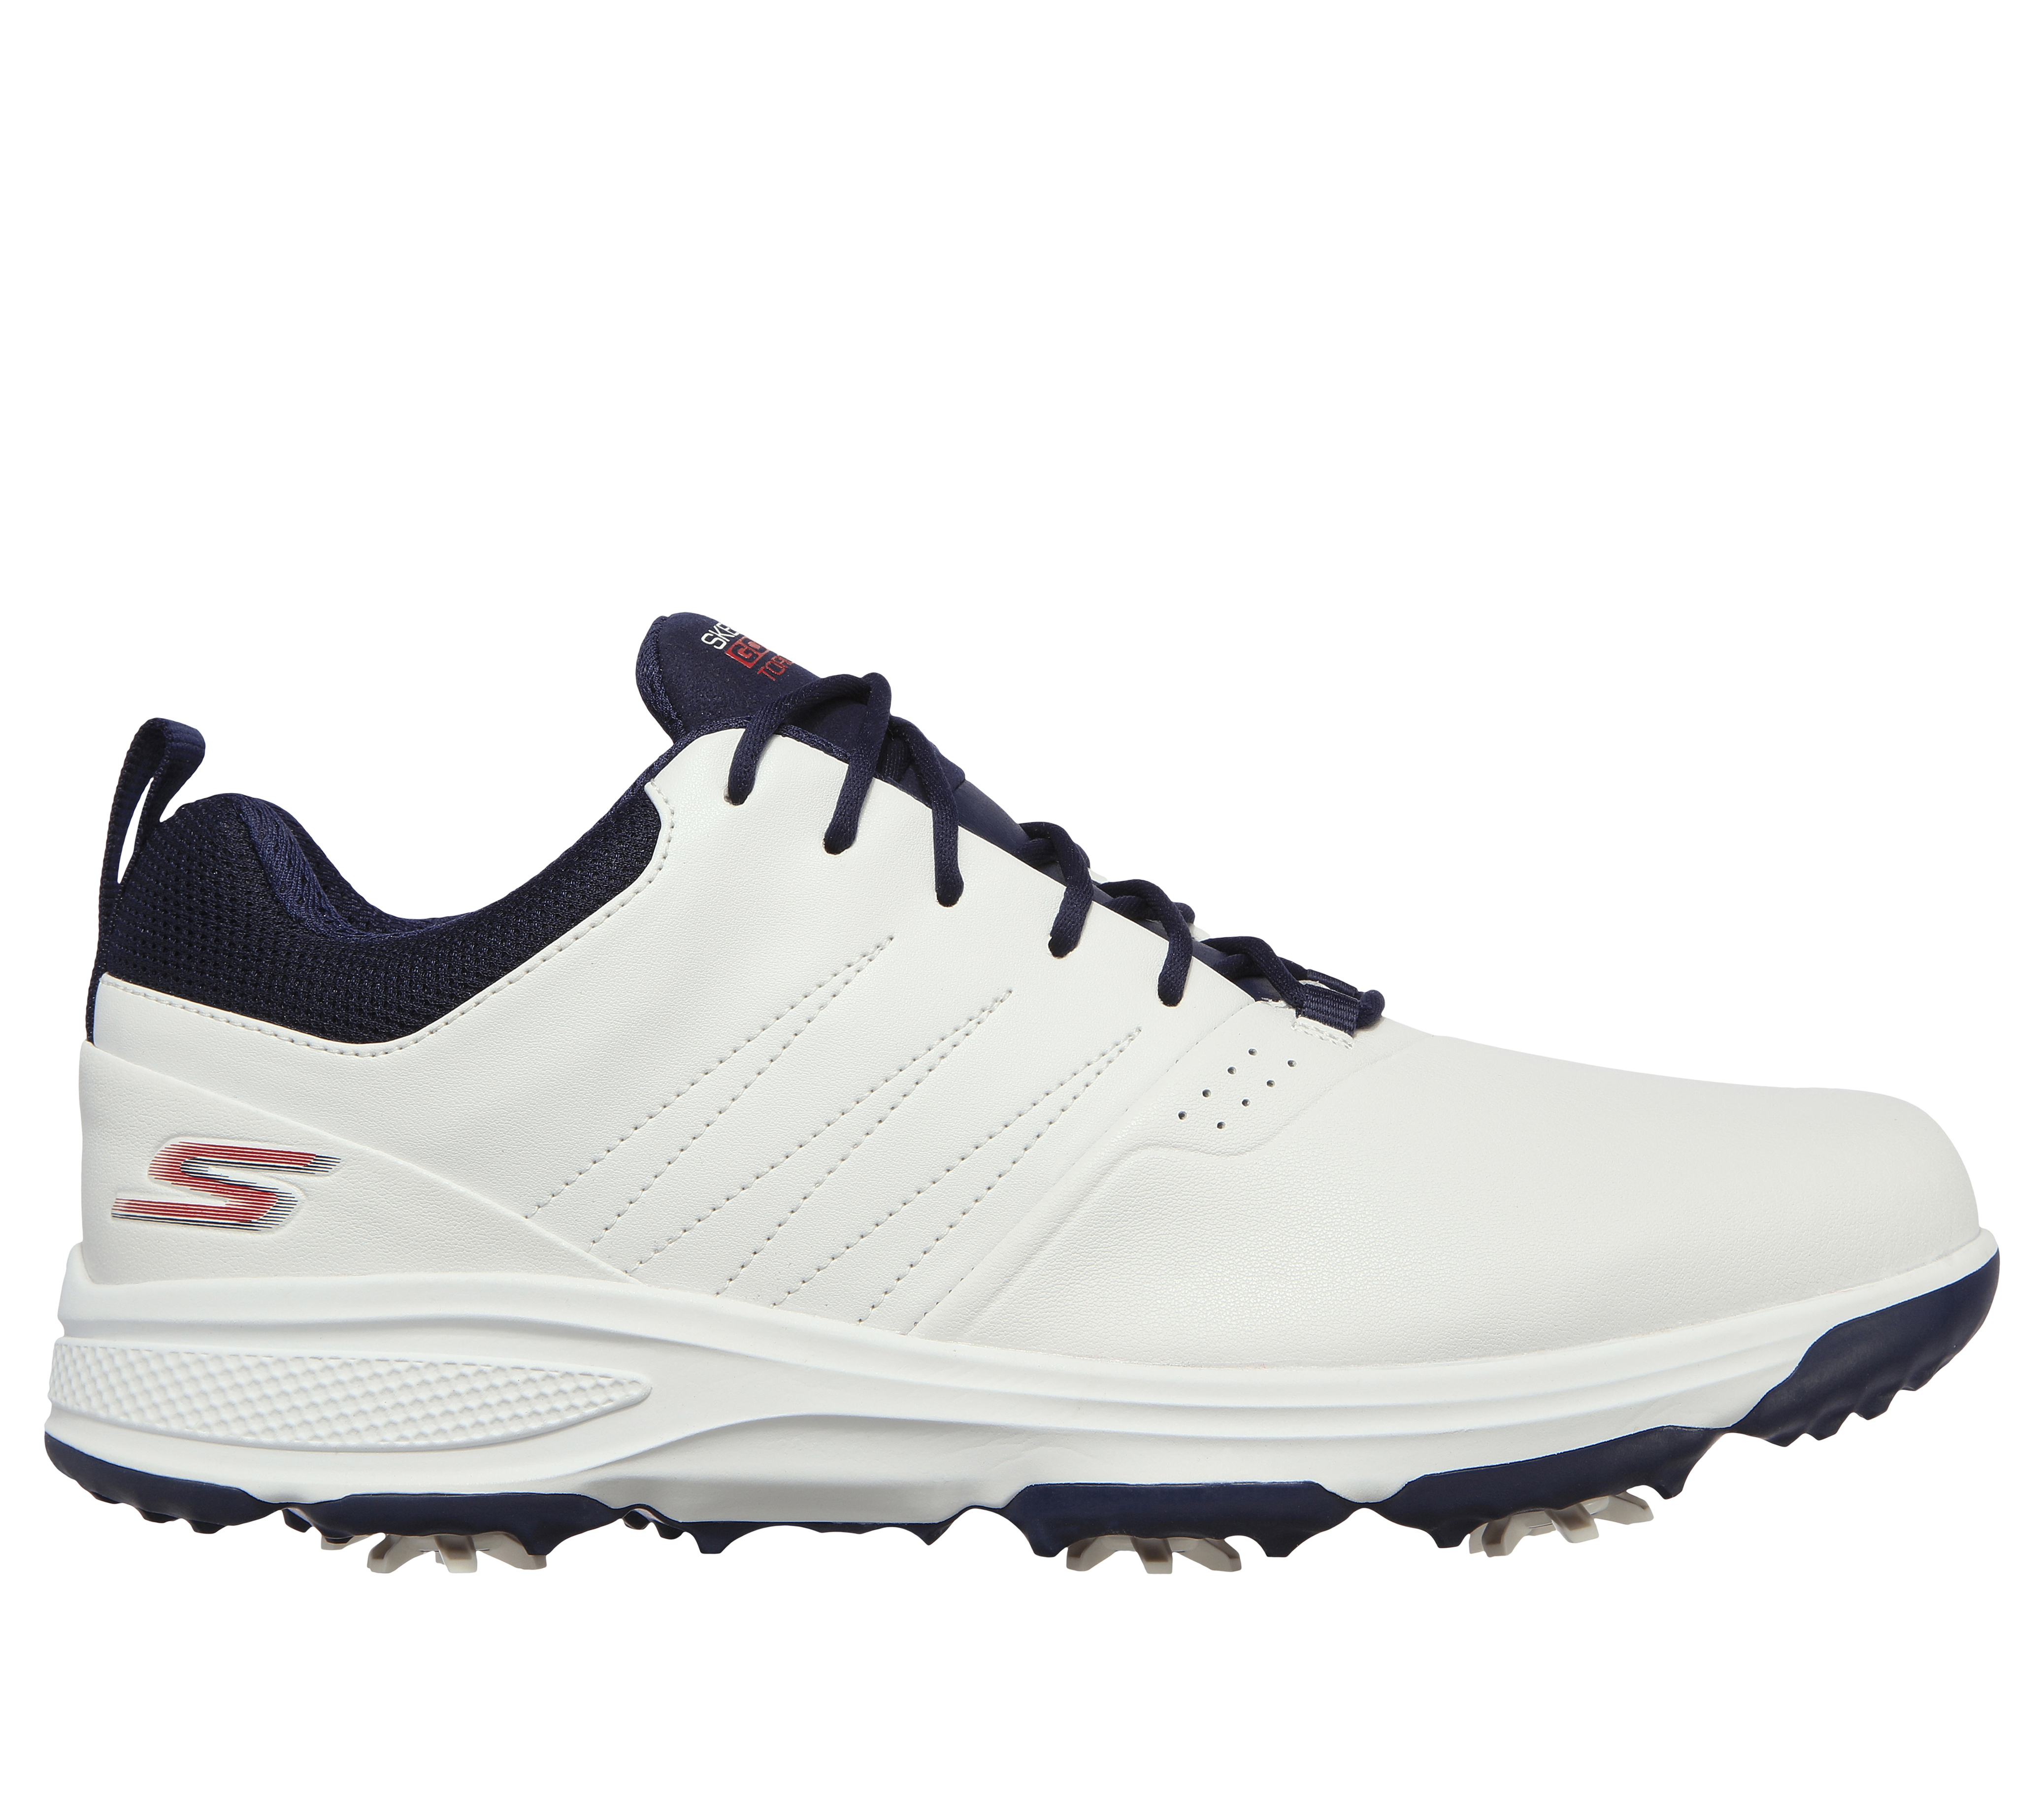 skechers golf shoes india